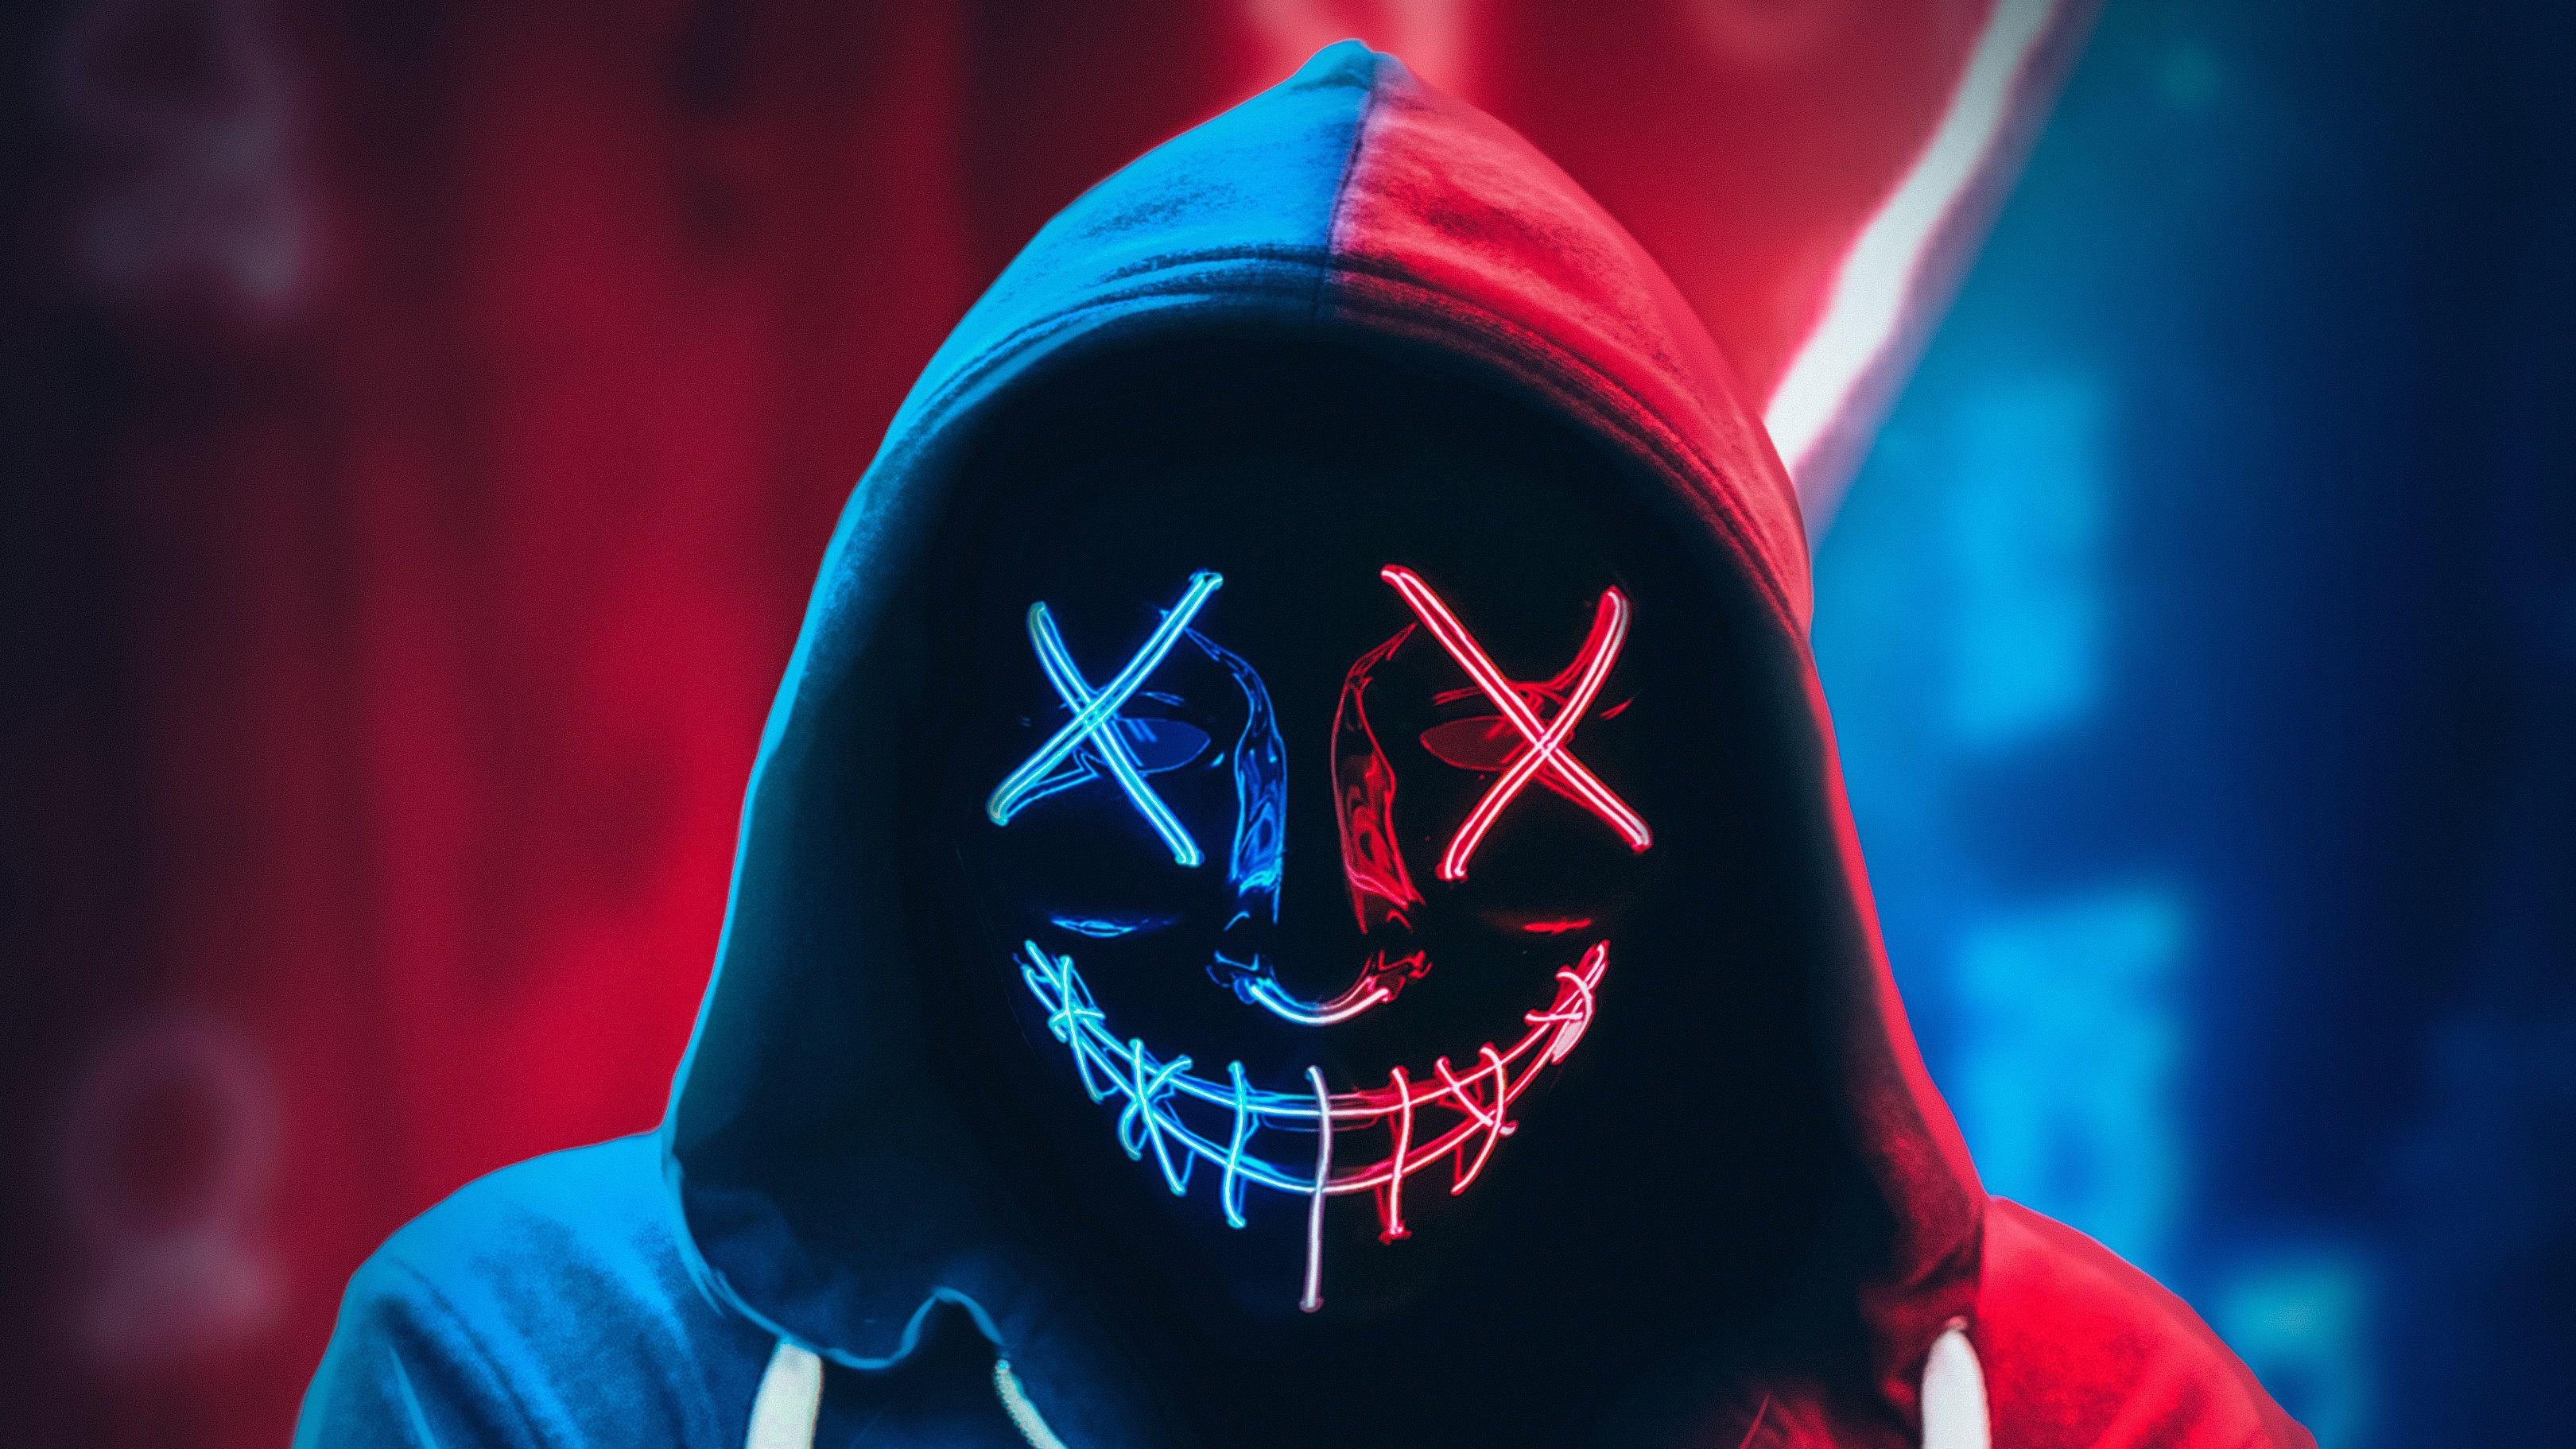 Neon Mask Wallpapers Top Free Neon Mask Backgrounds